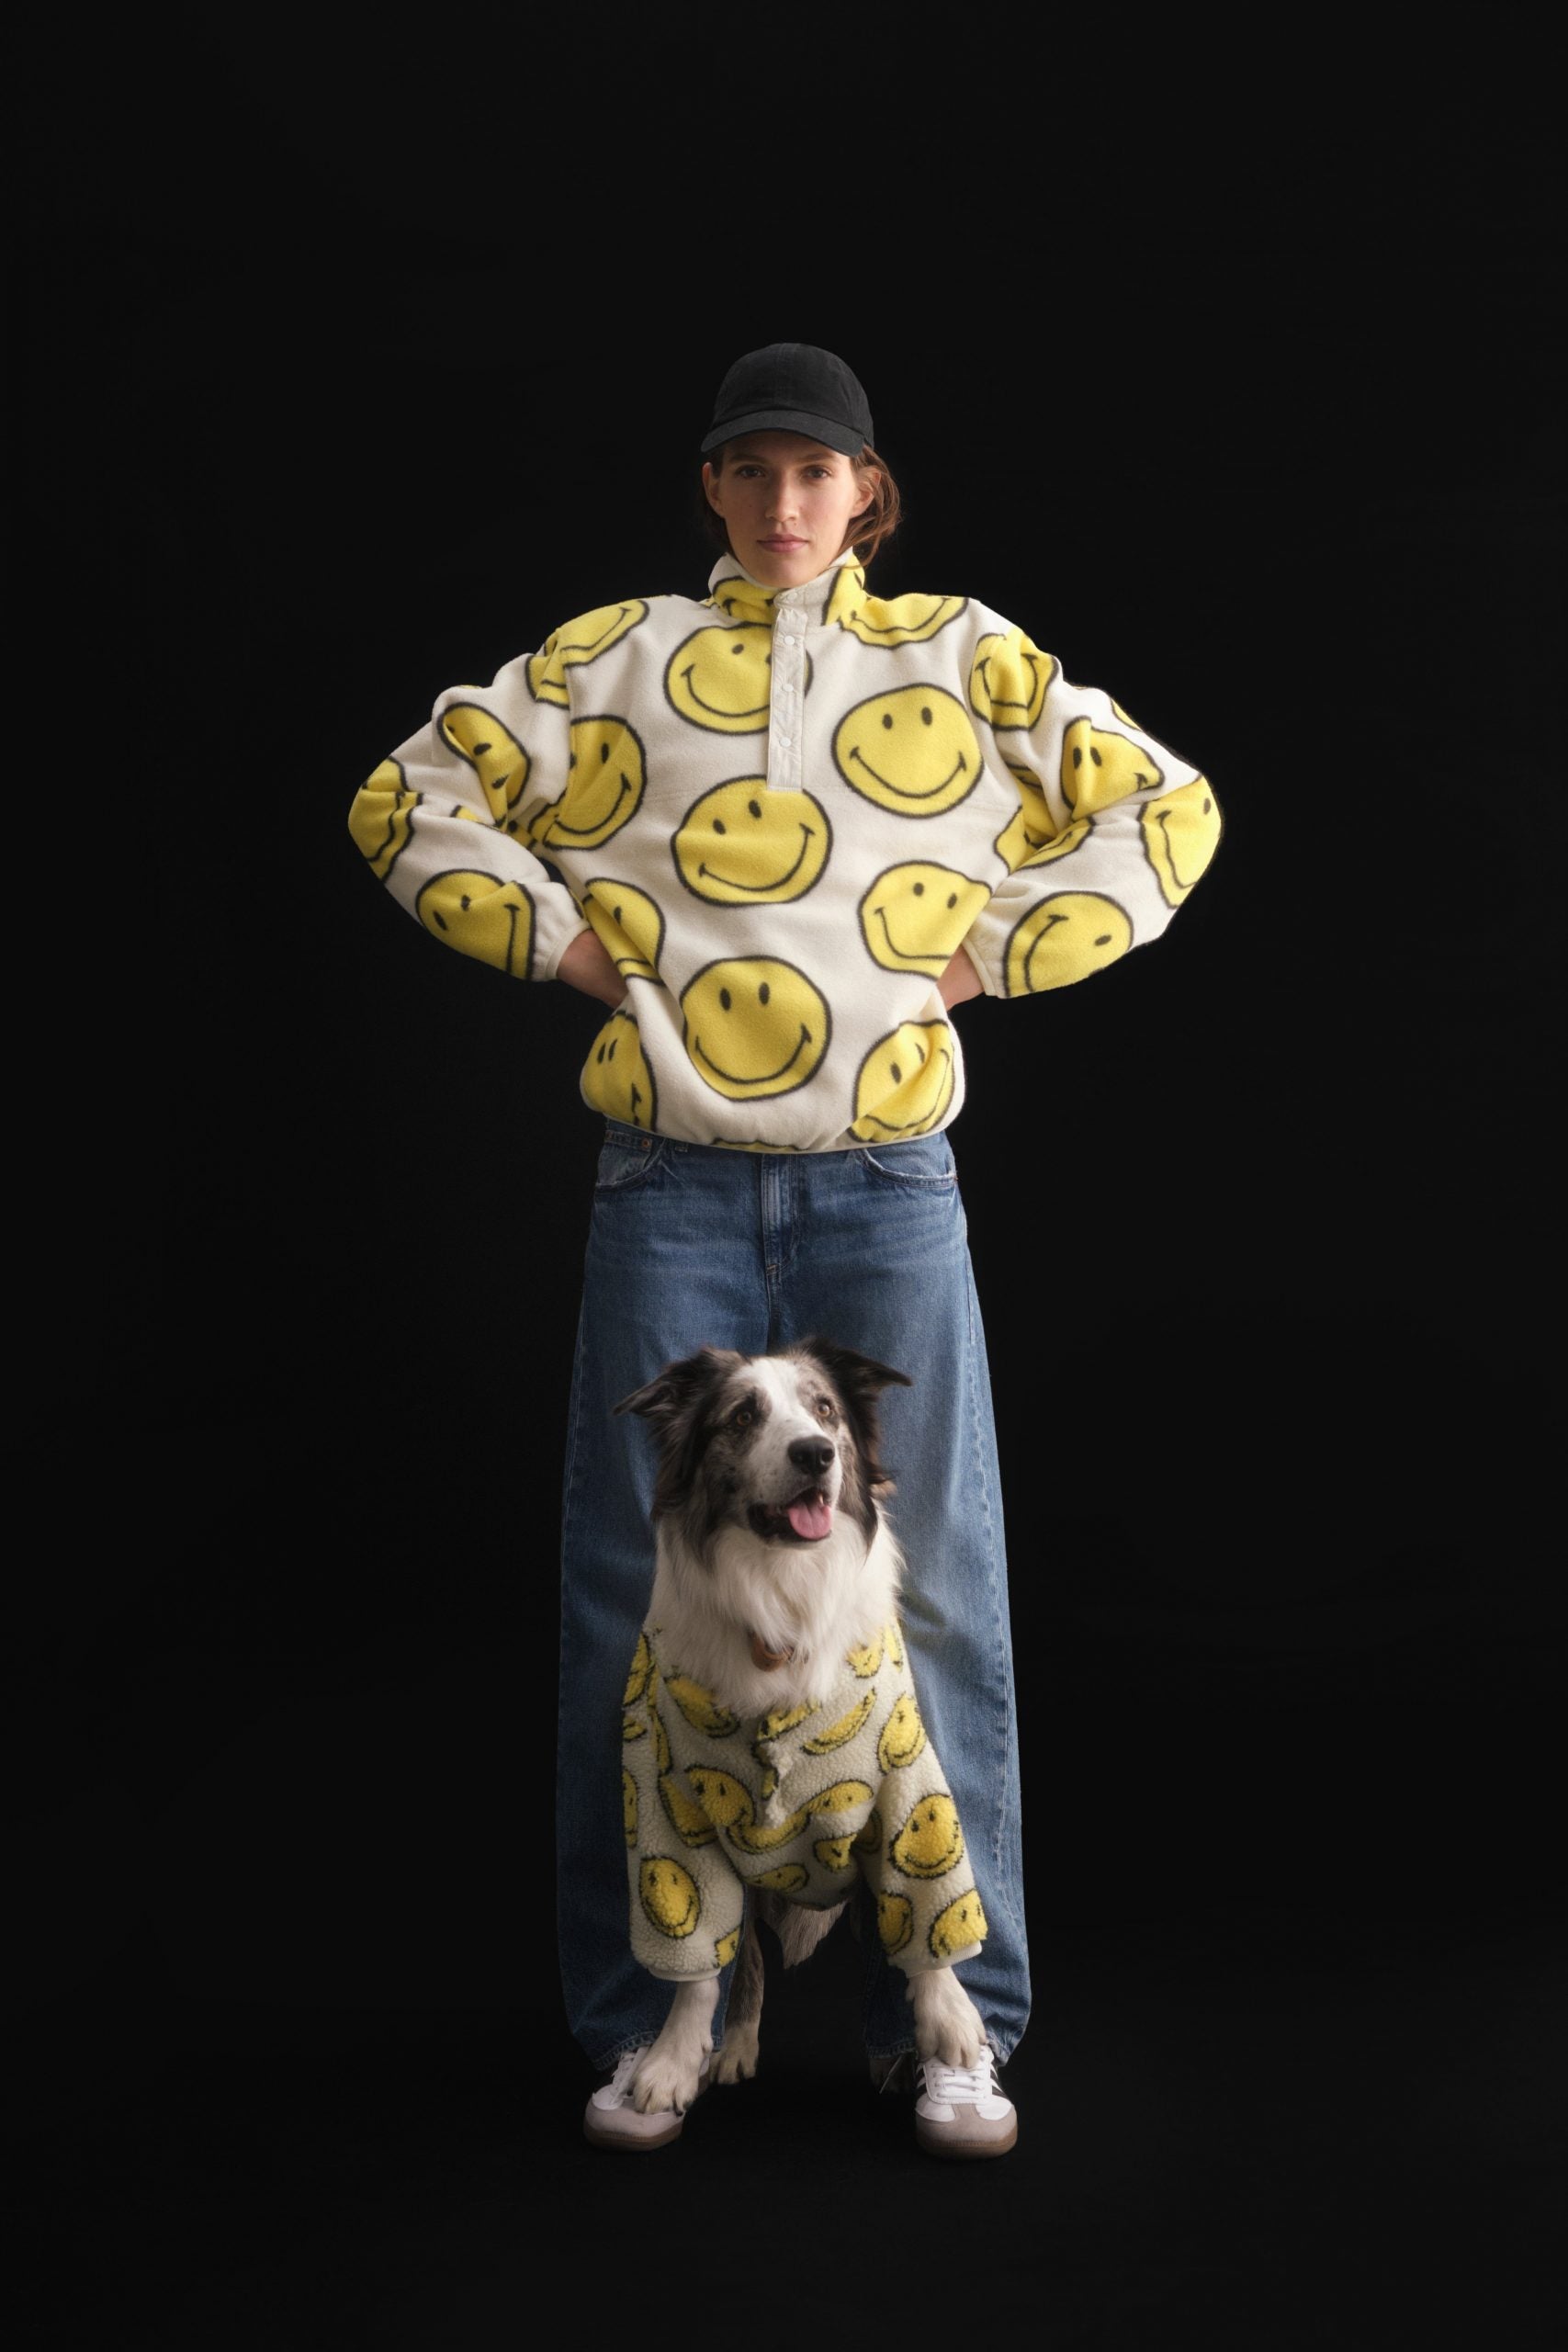 Smiley pattern printed fleece: available in an adult size.